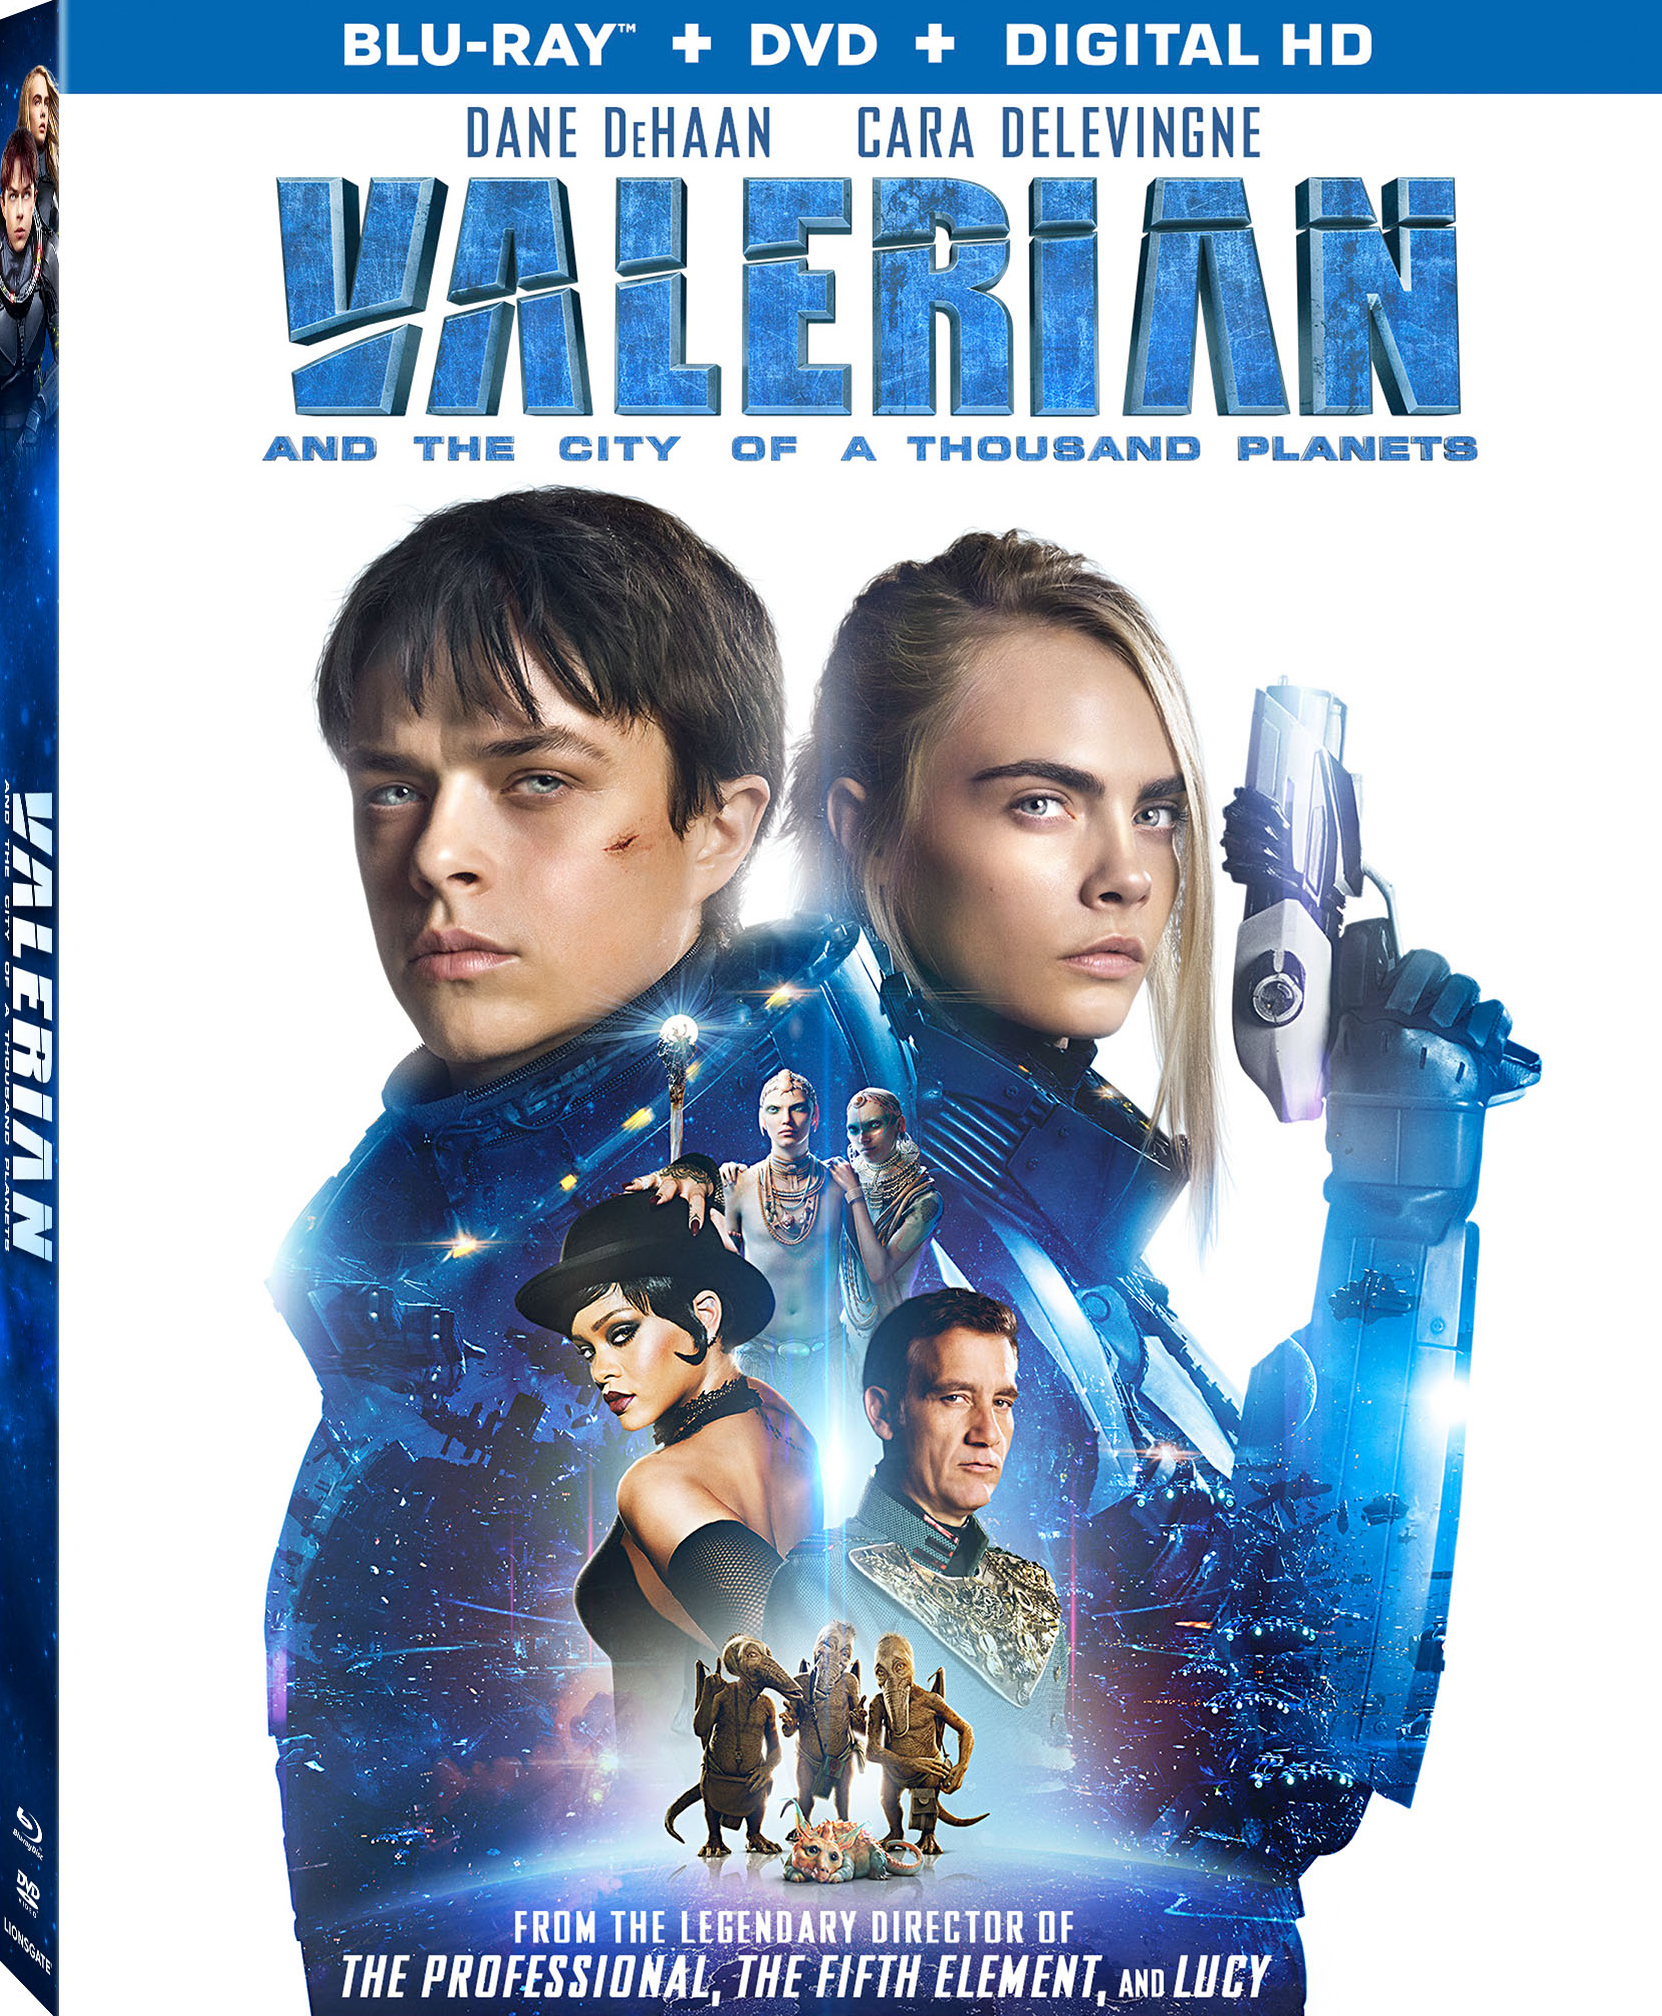 Valerian And The City Of A Thousand Planets Movie Poster Wallpapers